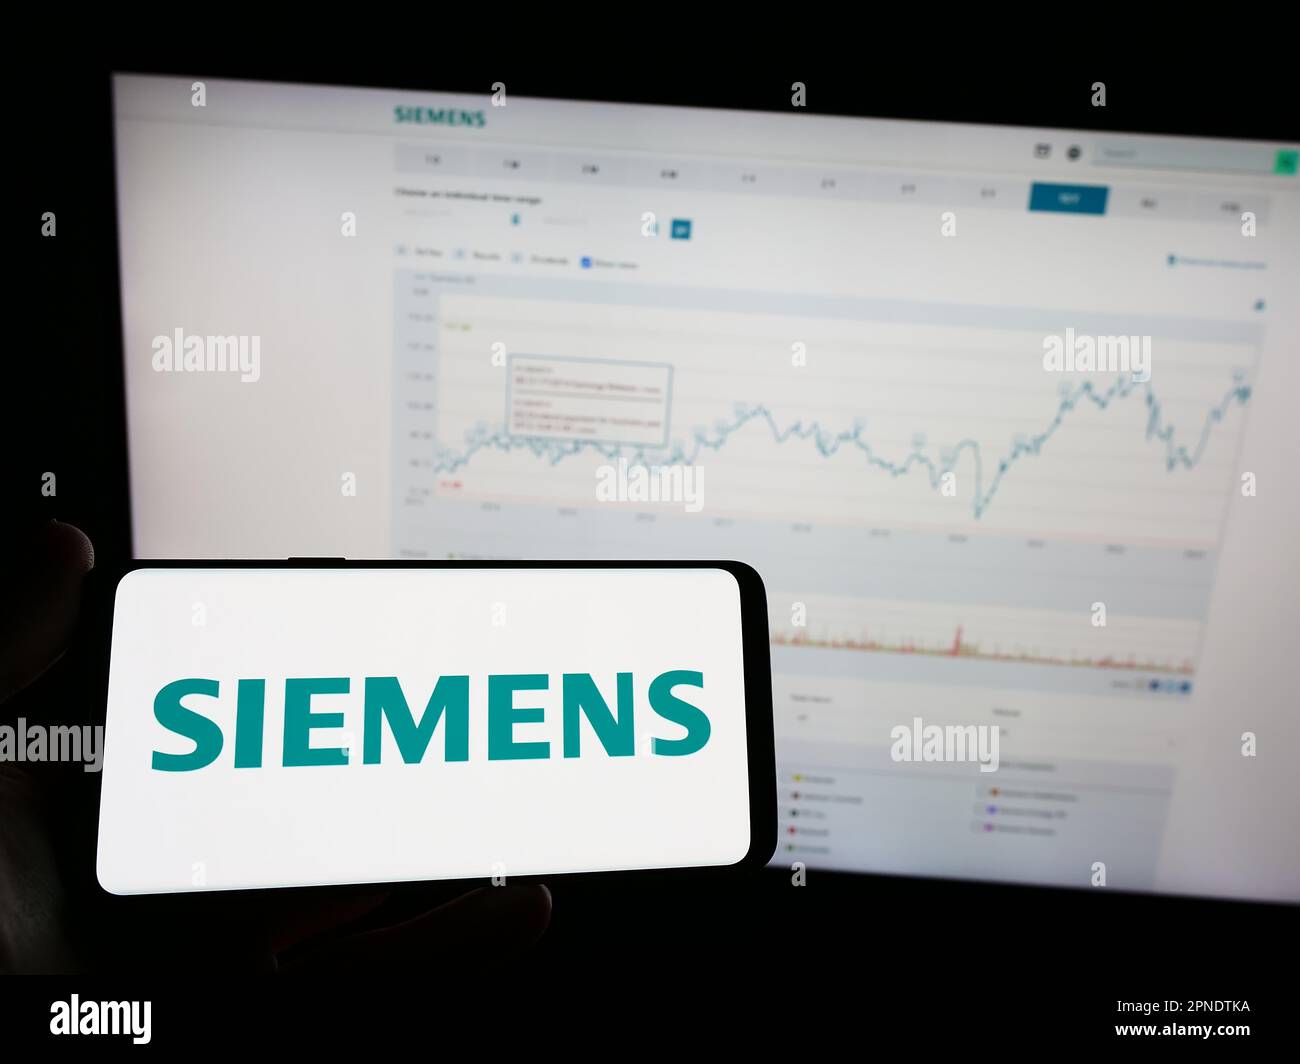 Person holding mobile phone with logo of German conglomerate Siemens AG on screen in front of business web page. Focus on phone display. Stock Photo